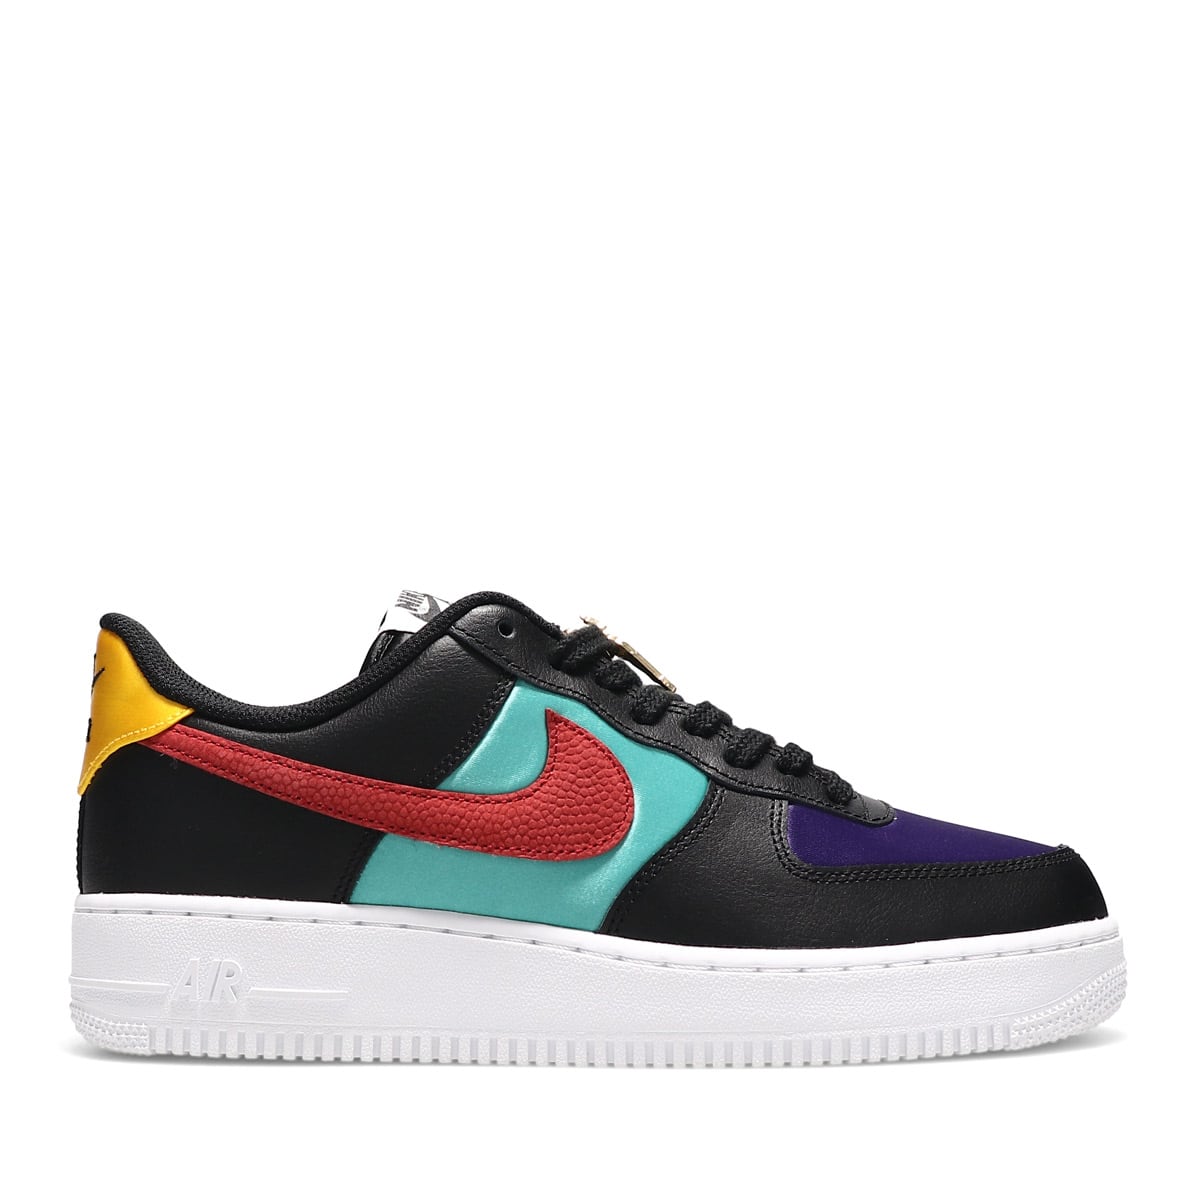 NIKE AIR FORCE 1 '07 LV8 EMB BLACK/GYM RED-WASHED TEAL-COURT